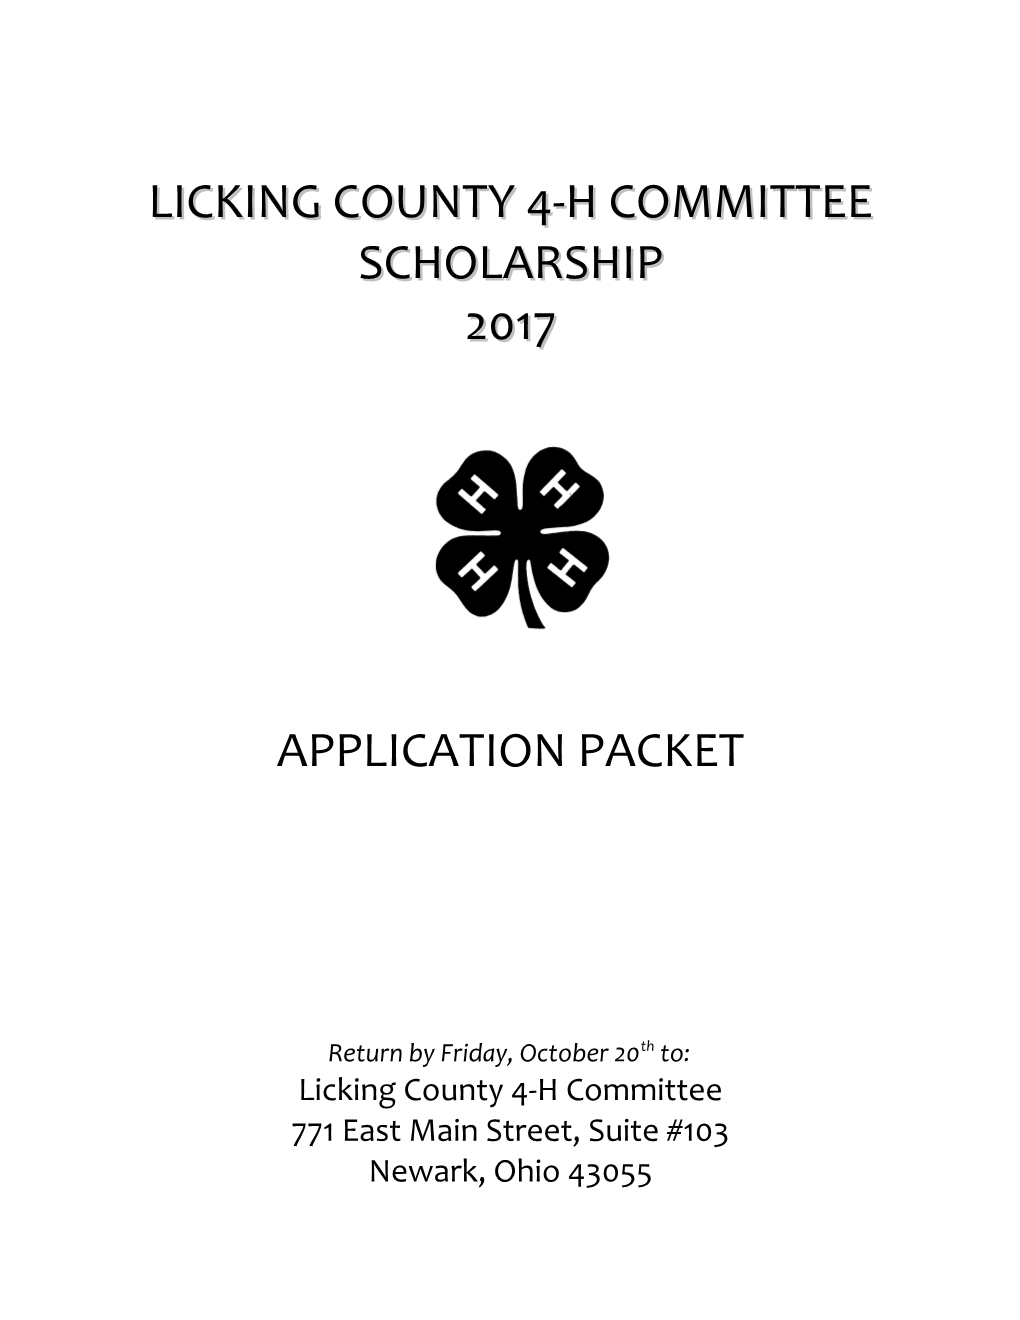 Licking County 4-H Committee Scholarship